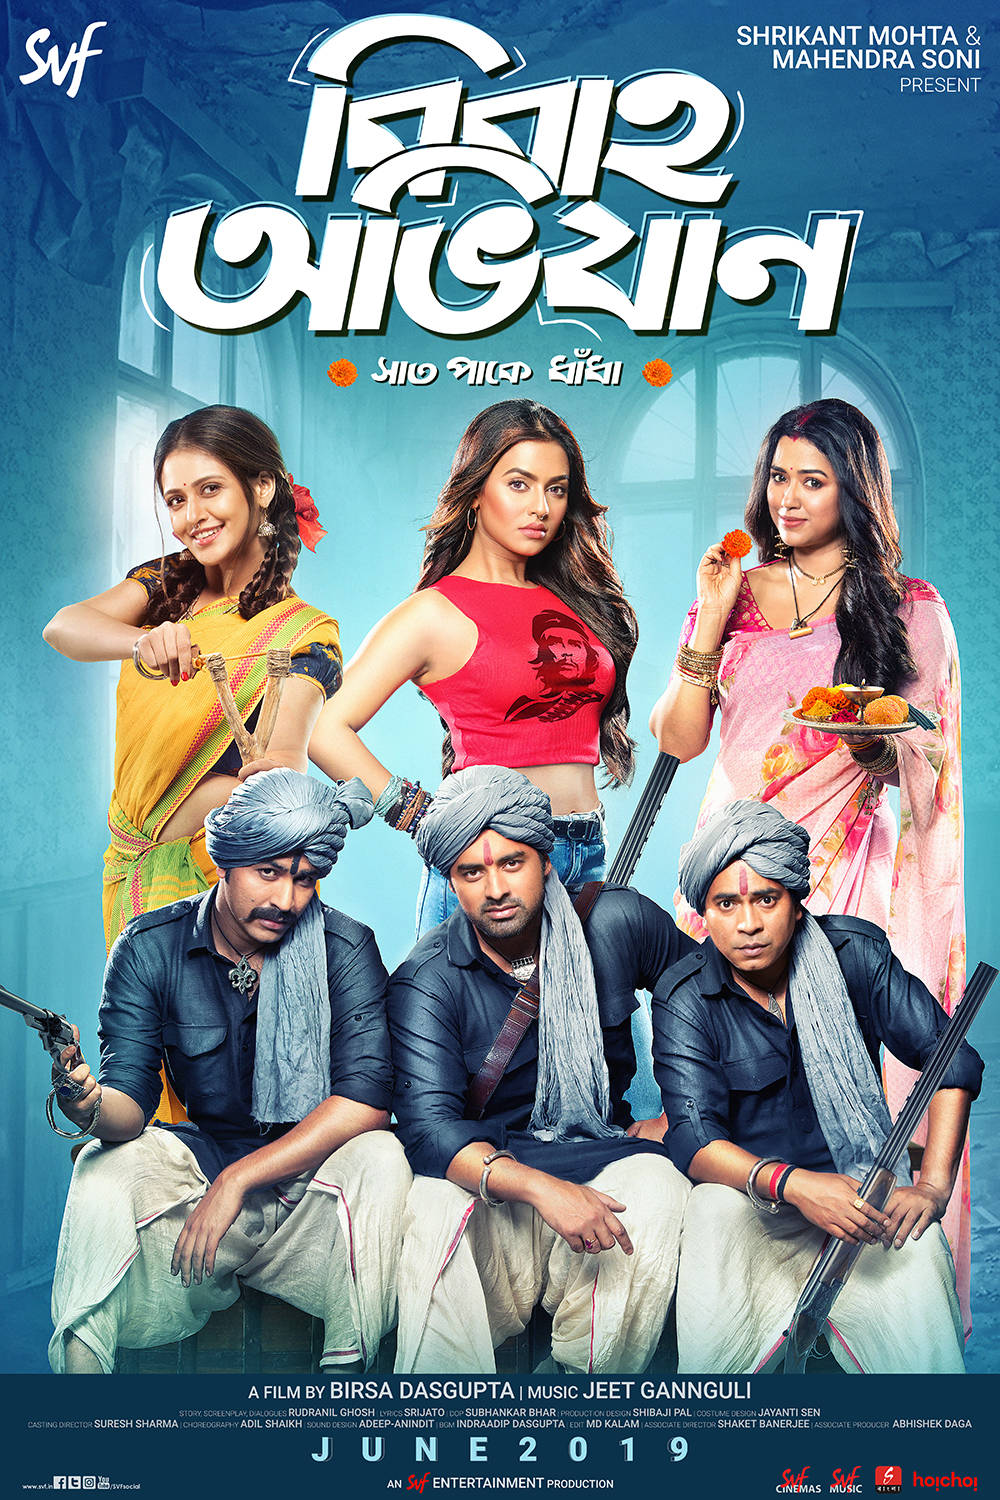 movie review in bangla